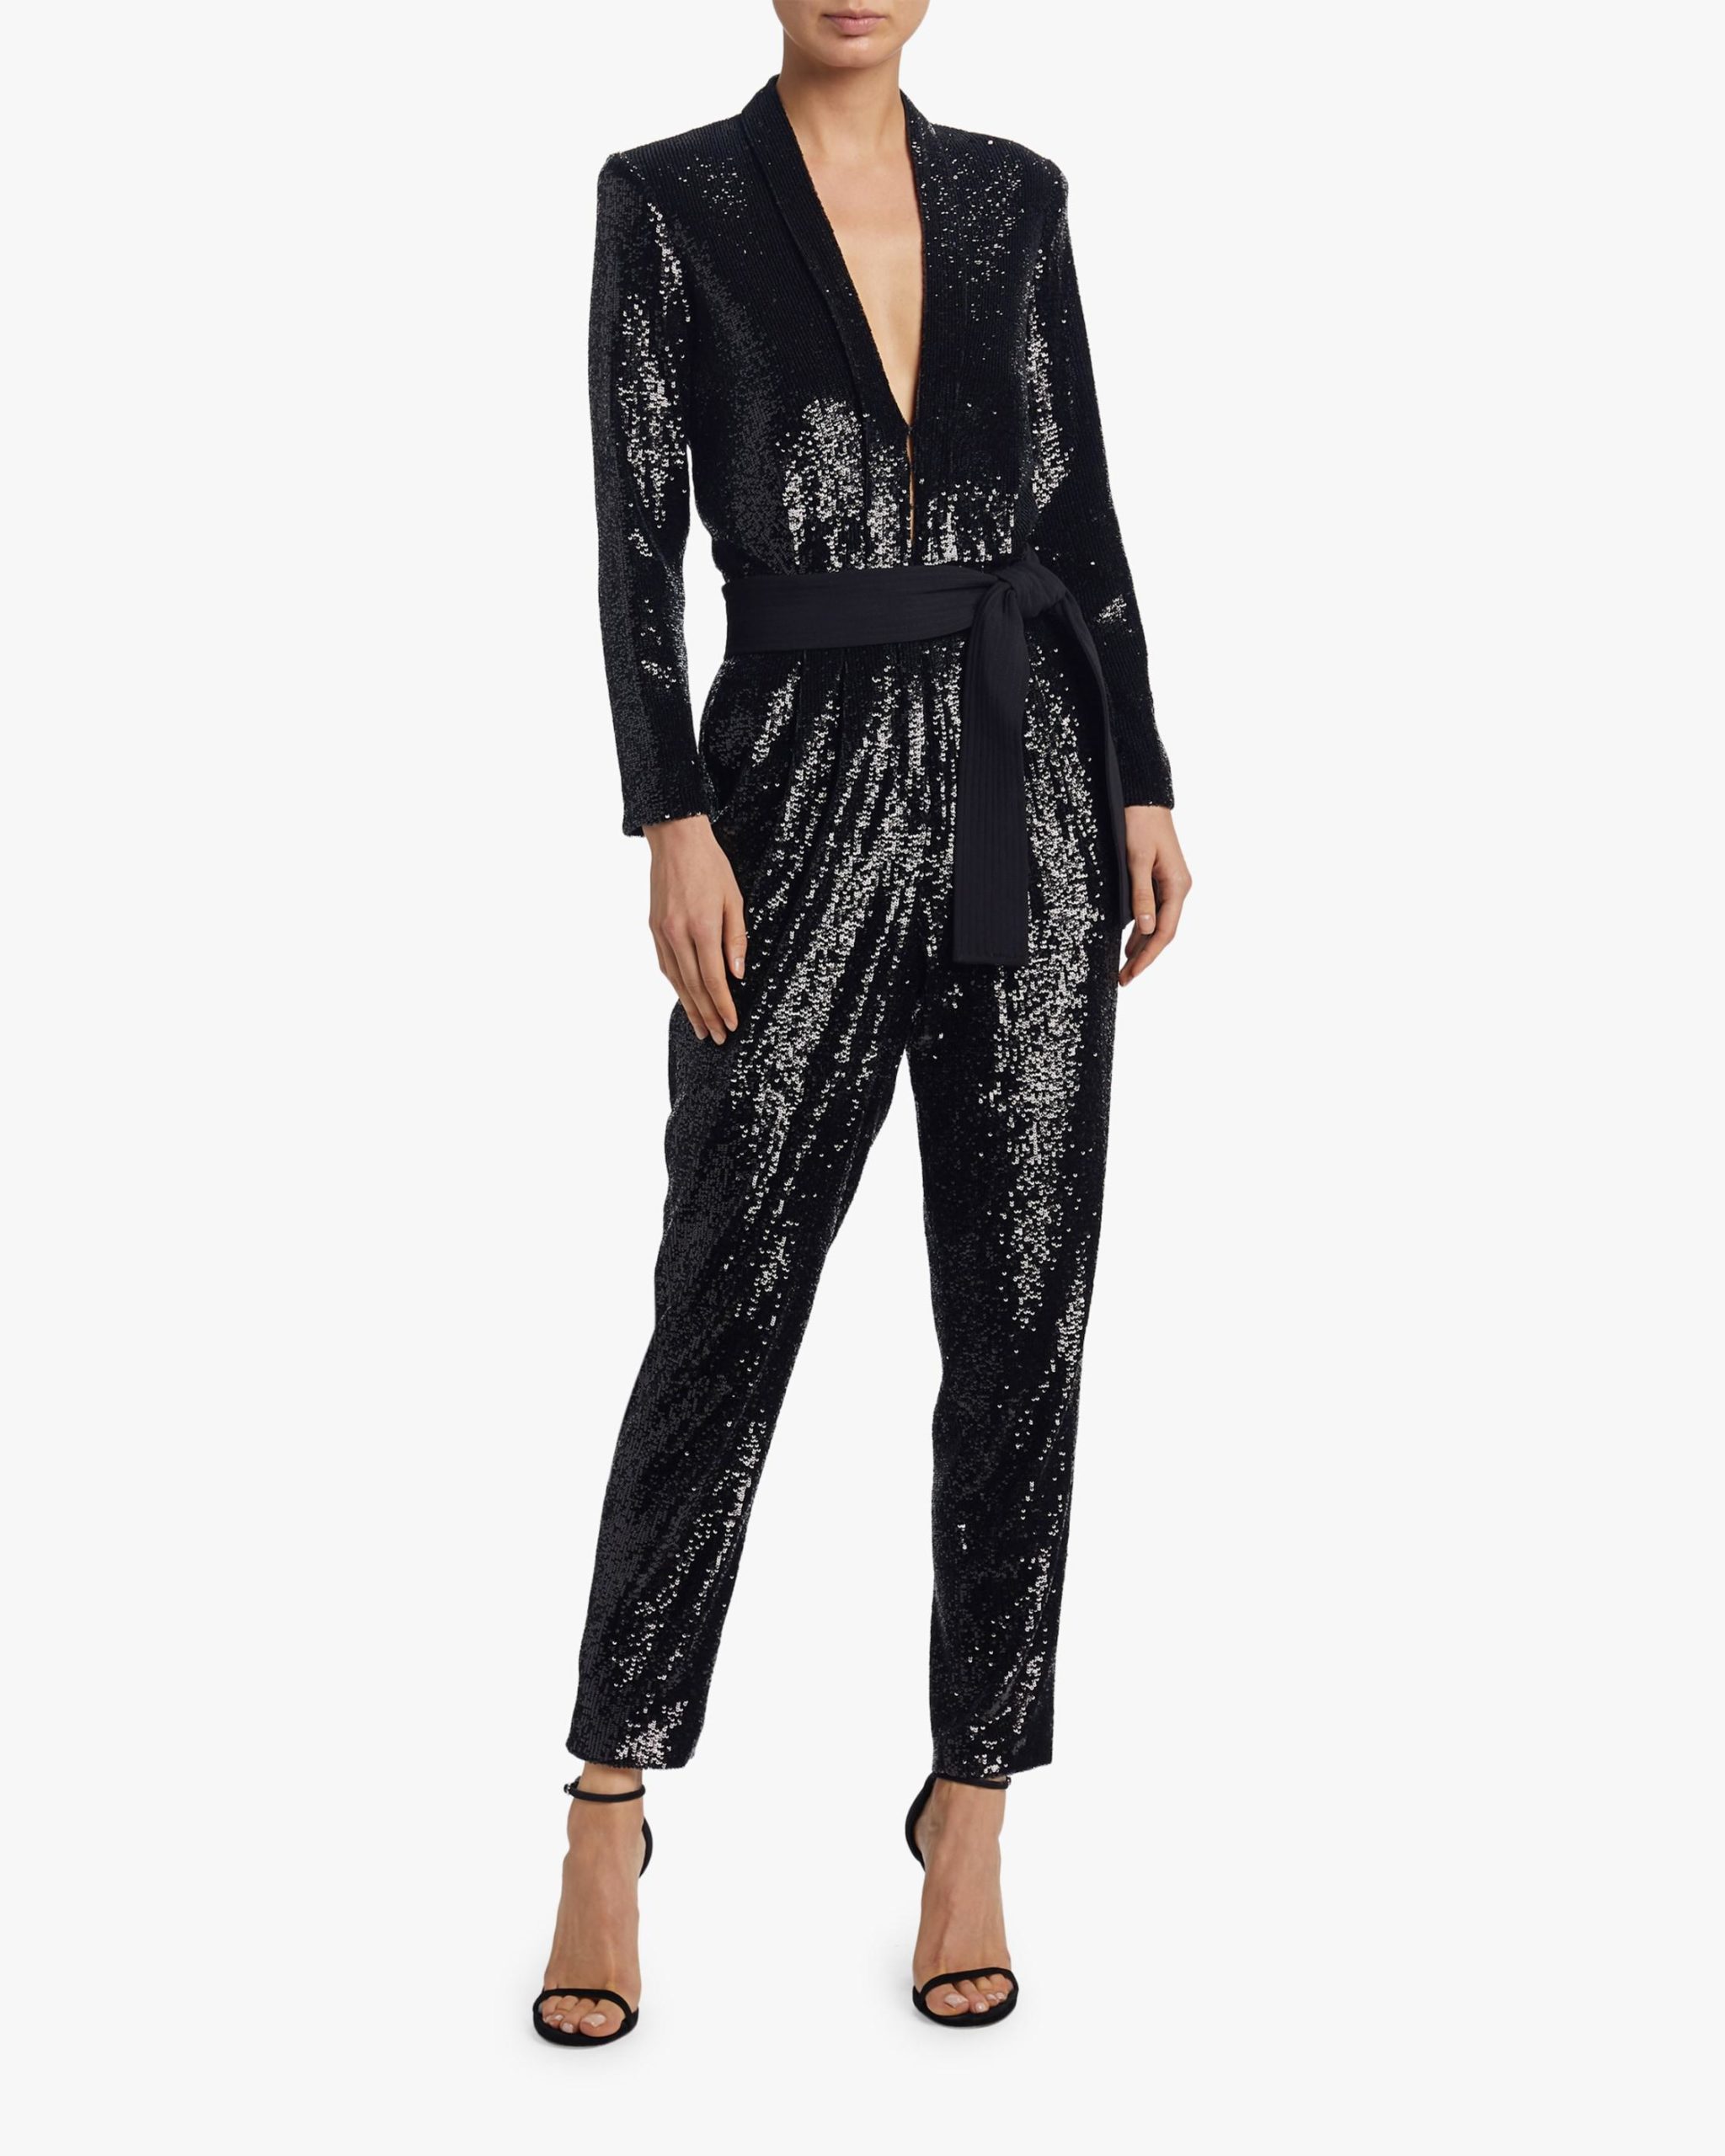 Come on, you know you love a plunging neckline and waist-cinching leather belt that adds up to full body disco glam.